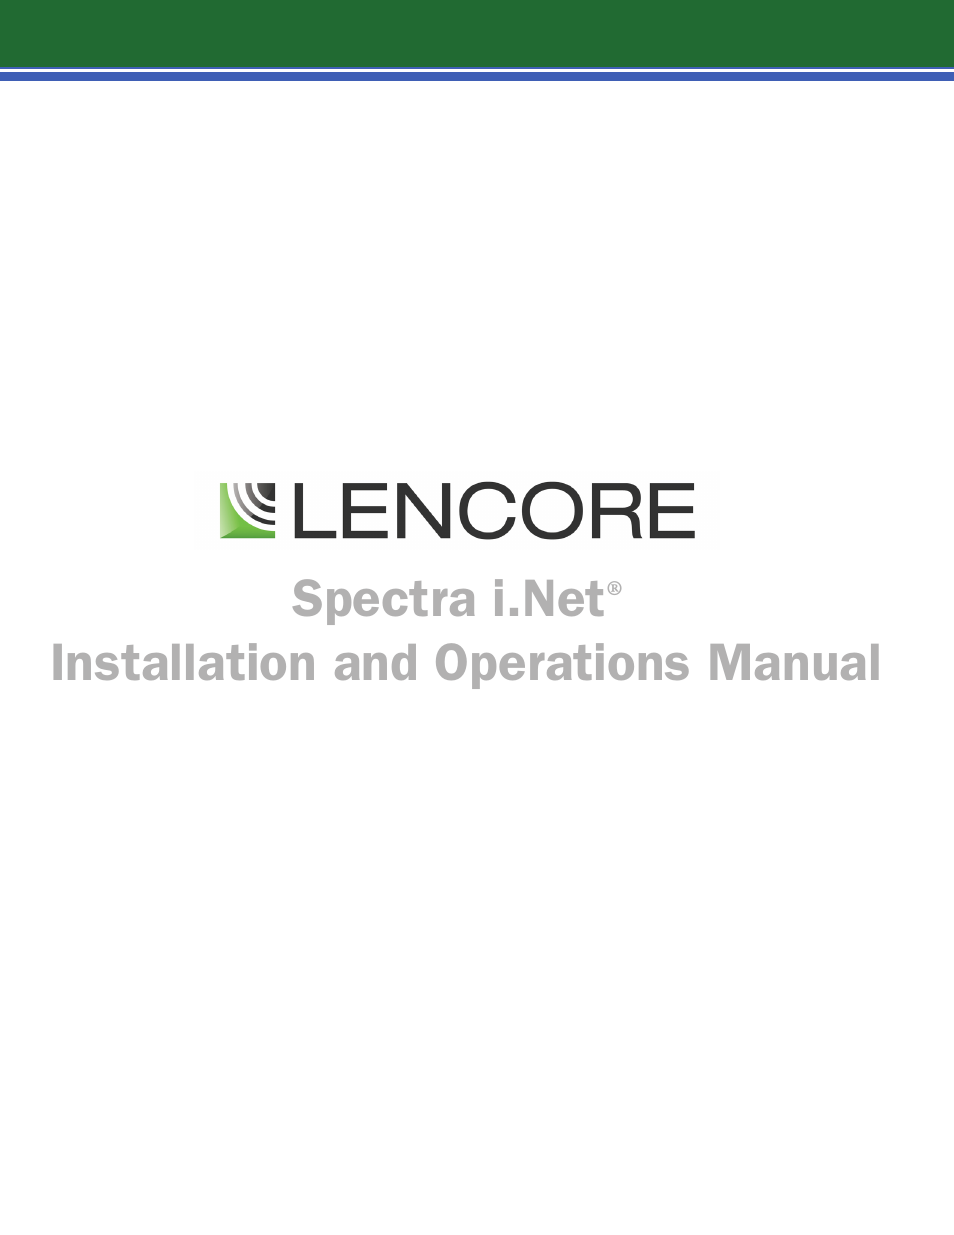 Spectra i.Net: Installation and Operations Manual